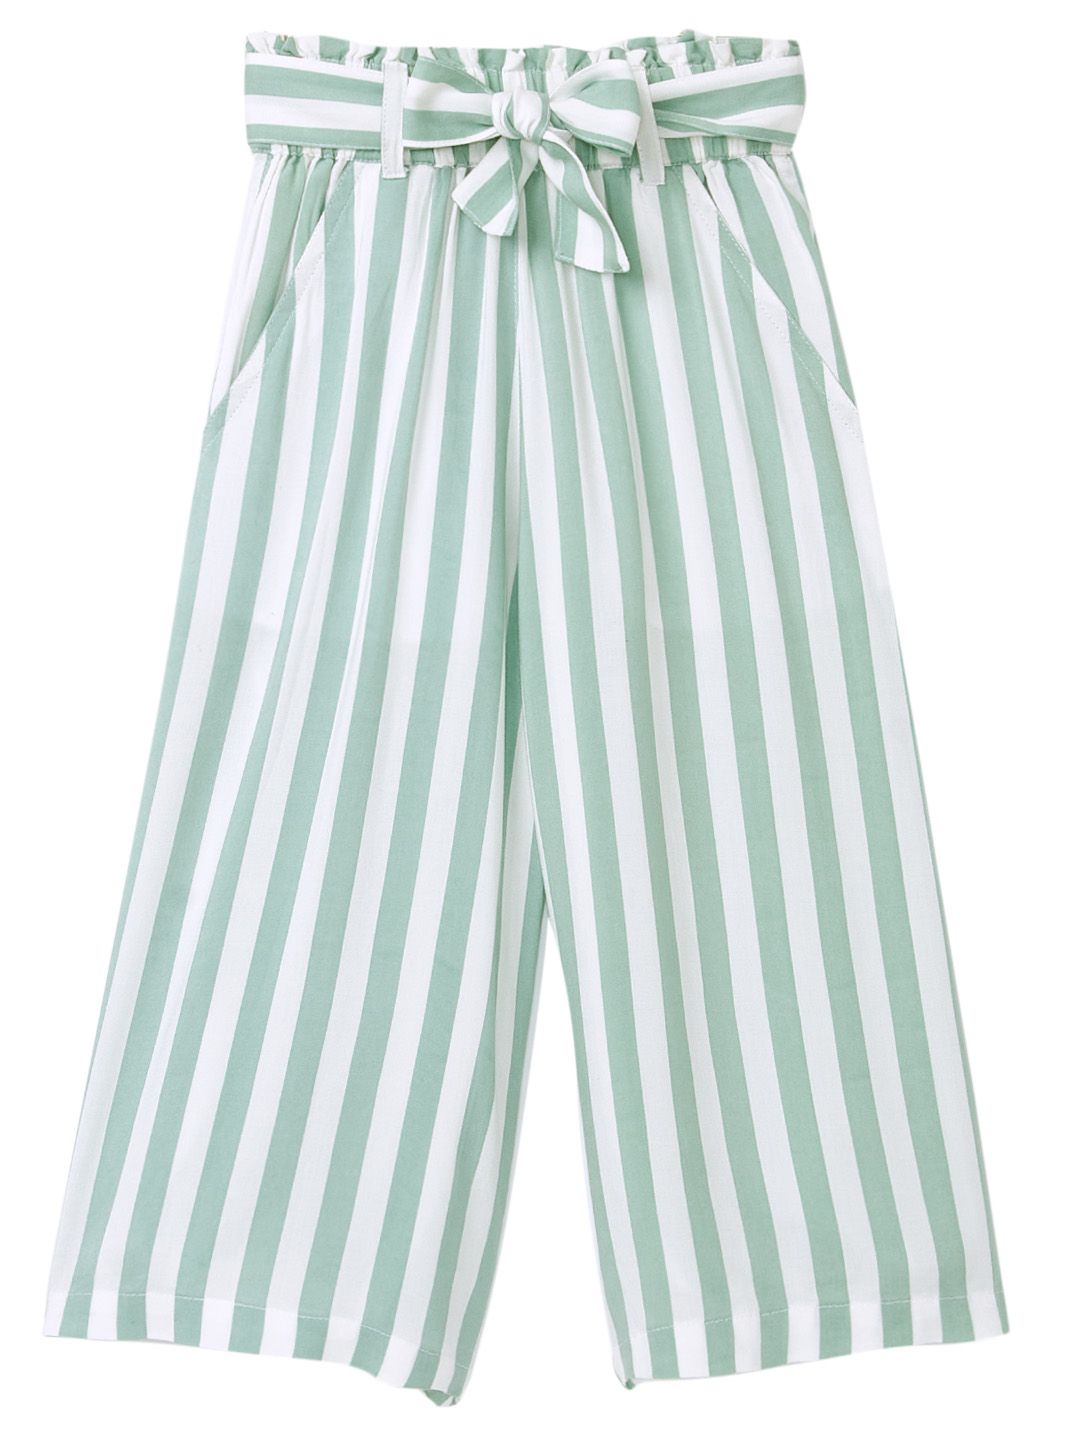 Girls Striped Printed Rayon White Palazzo With Stripes